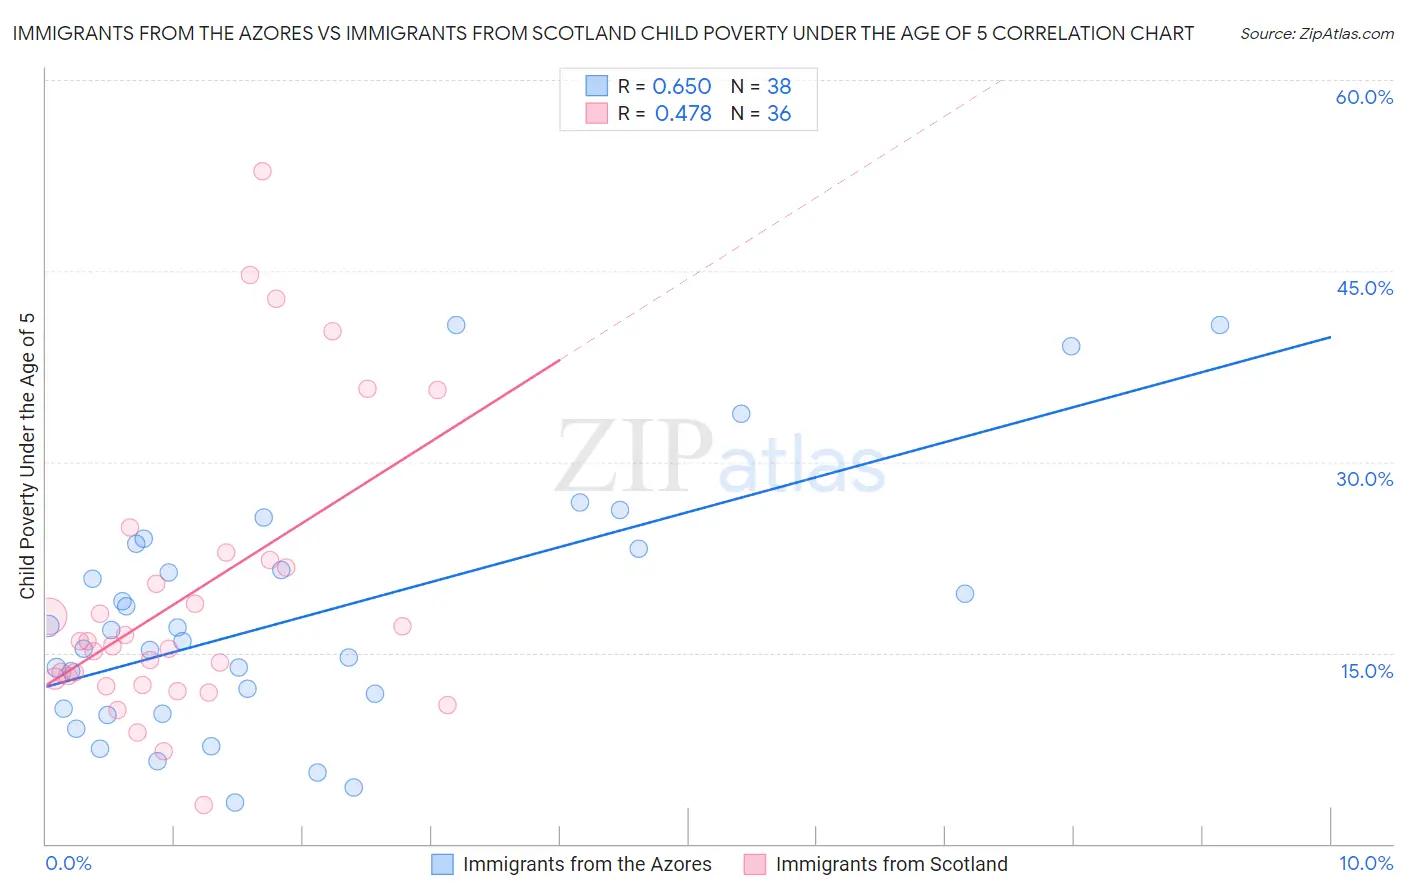 Immigrants from the Azores vs Immigrants from Scotland Child Poverty Under the Age of 5